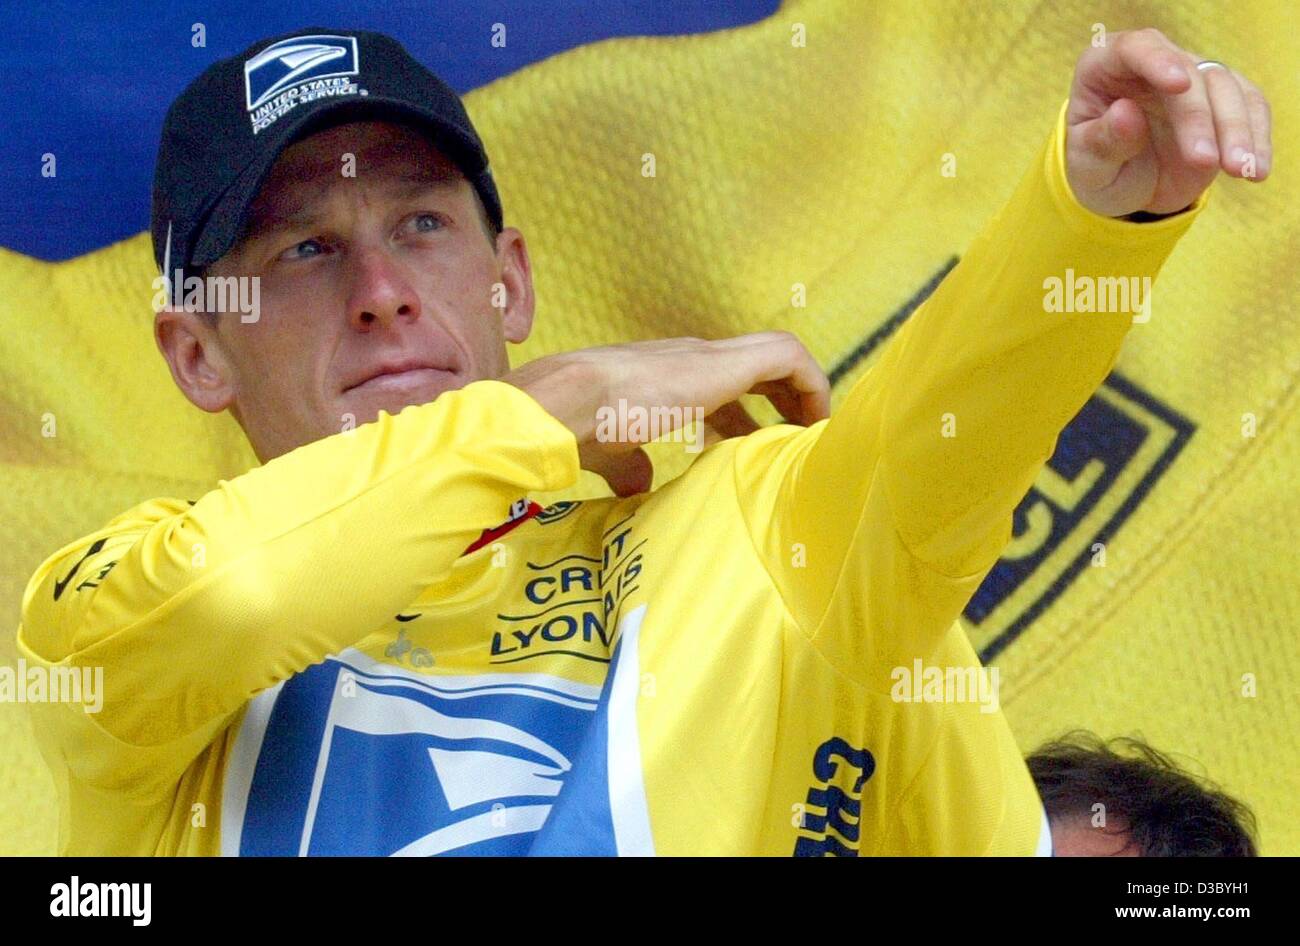 (dpa) - US Postal-Berry Floor's Lance Armstrong from the US puts on the overall leader's yellow jersey after the 17th stage of the 2003 Tour de France cycling race in Bordeaux, 24 July 2003. The 181.5km long 17th stage of the world's biggest cycling race led the cyclists from Dax to Bordeaux. Stock Photo